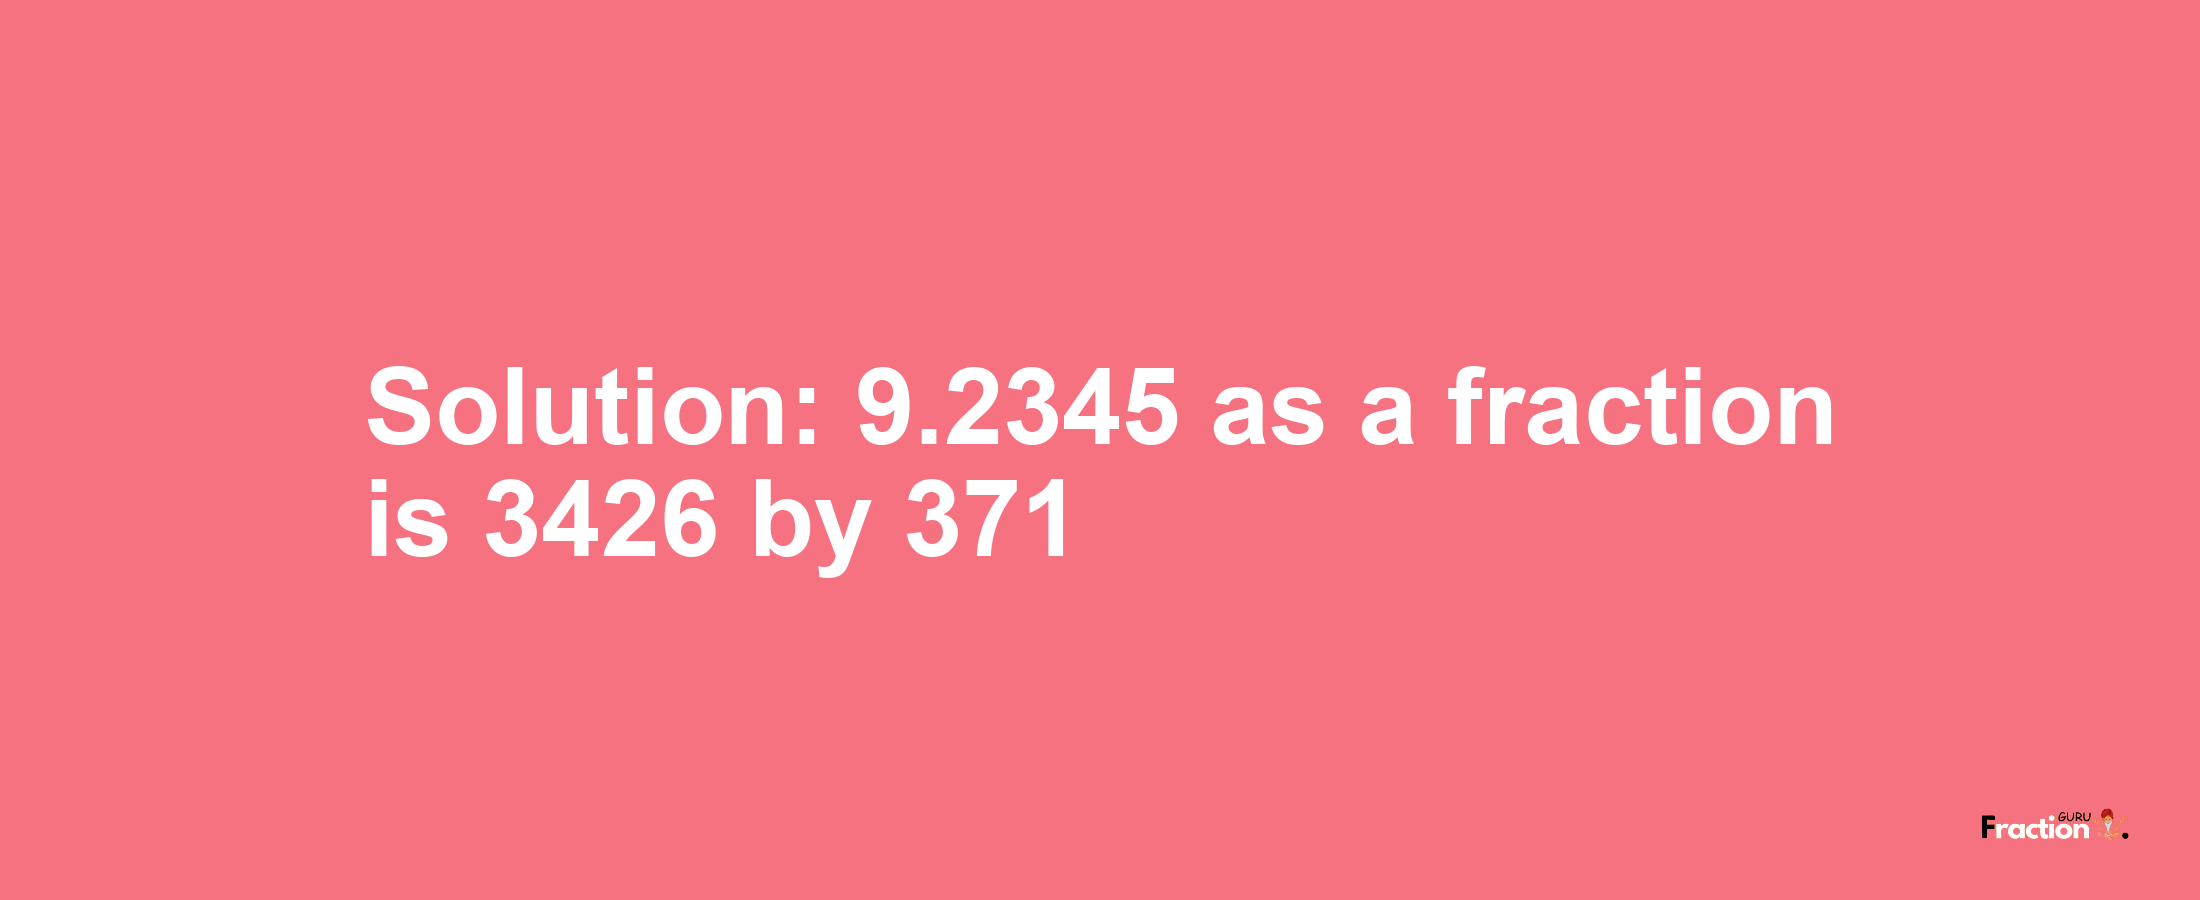 Solution:9.2345 as a fraction is 3426/371